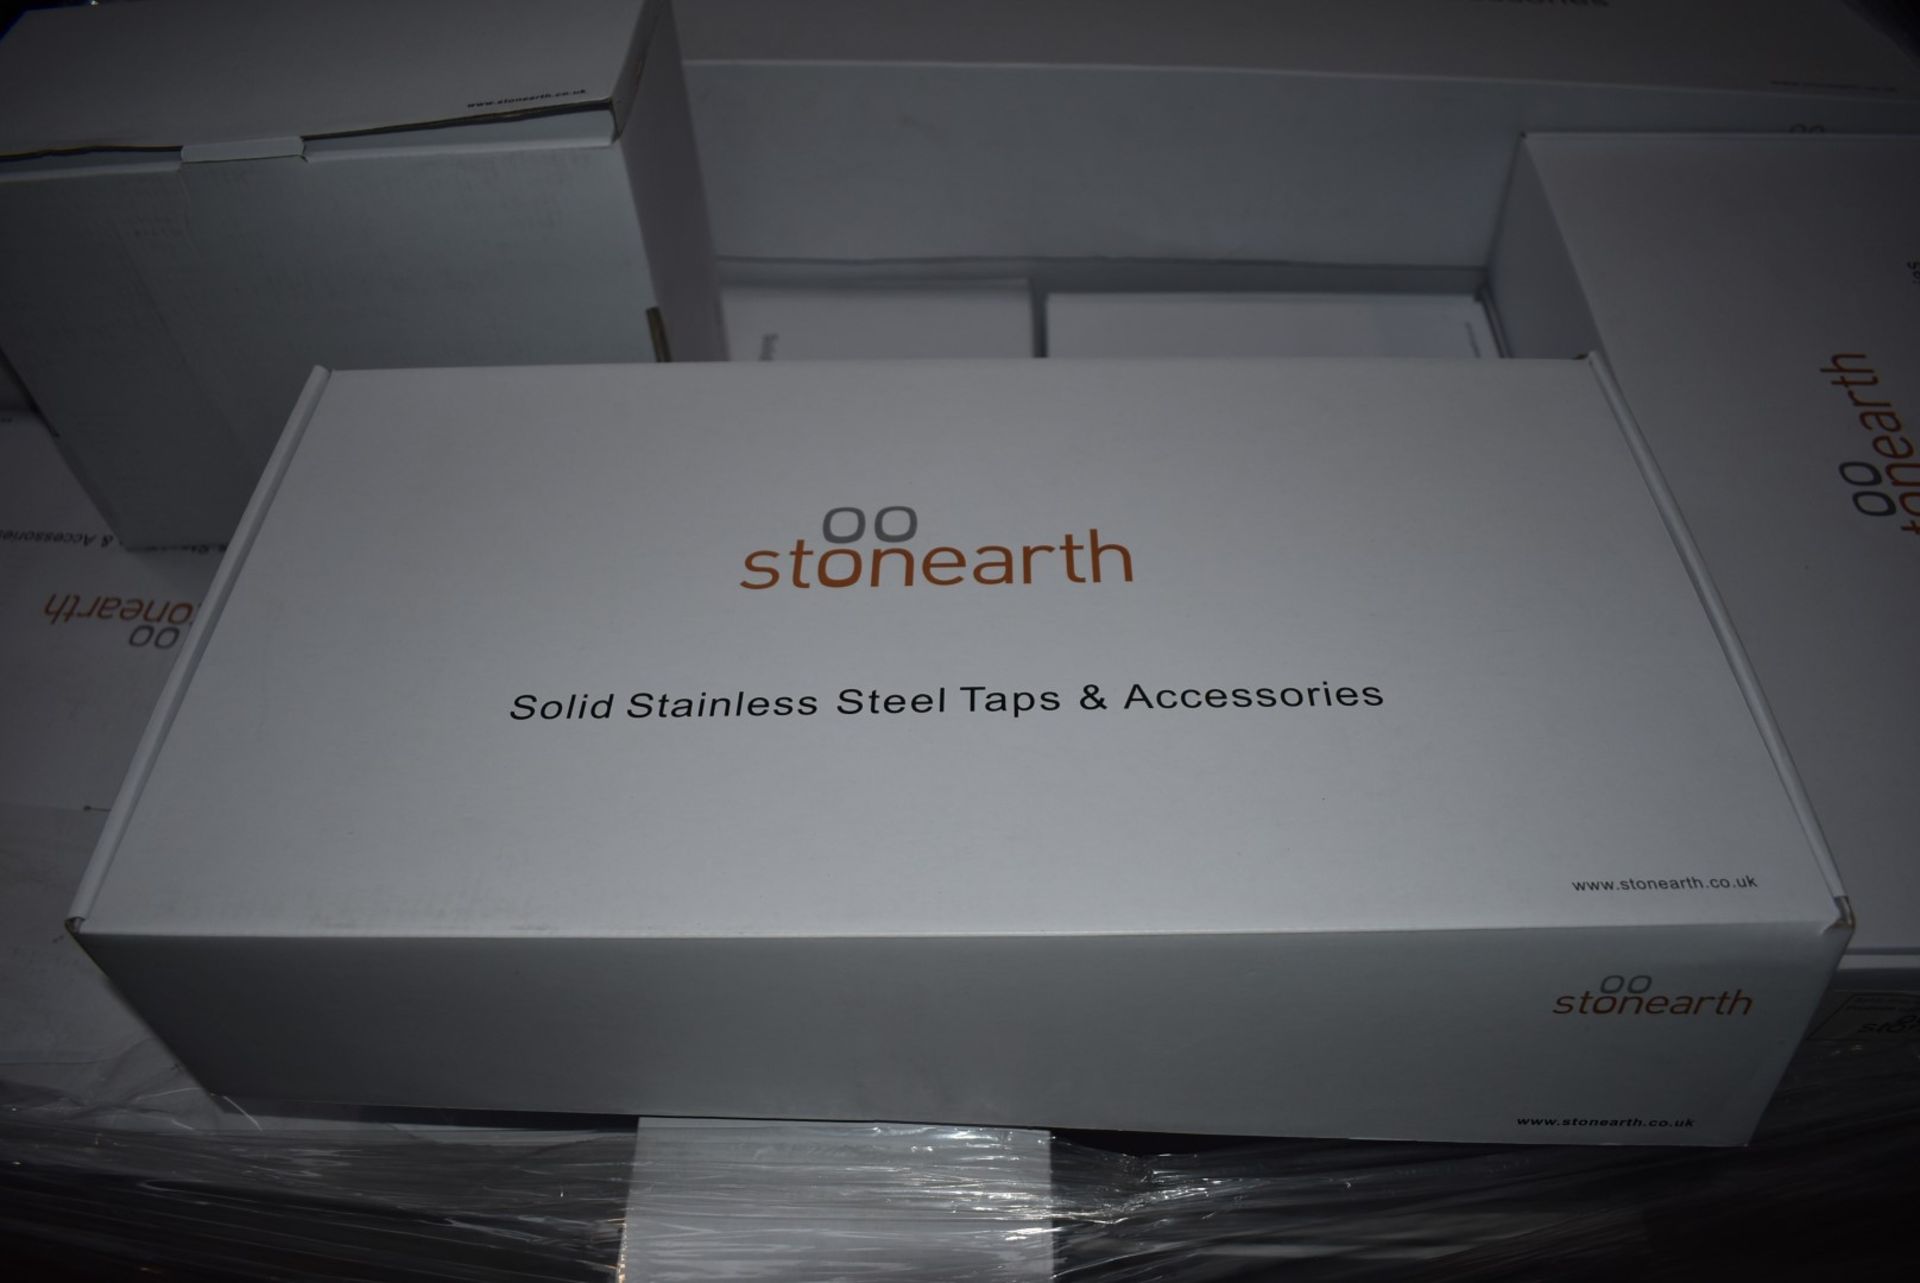 1 x Stonearth Bath Waste Kit With Stainless Steel Covers - Brand New & Boxed - RRP £125 - Ref: TP893 - Image 2 of 5